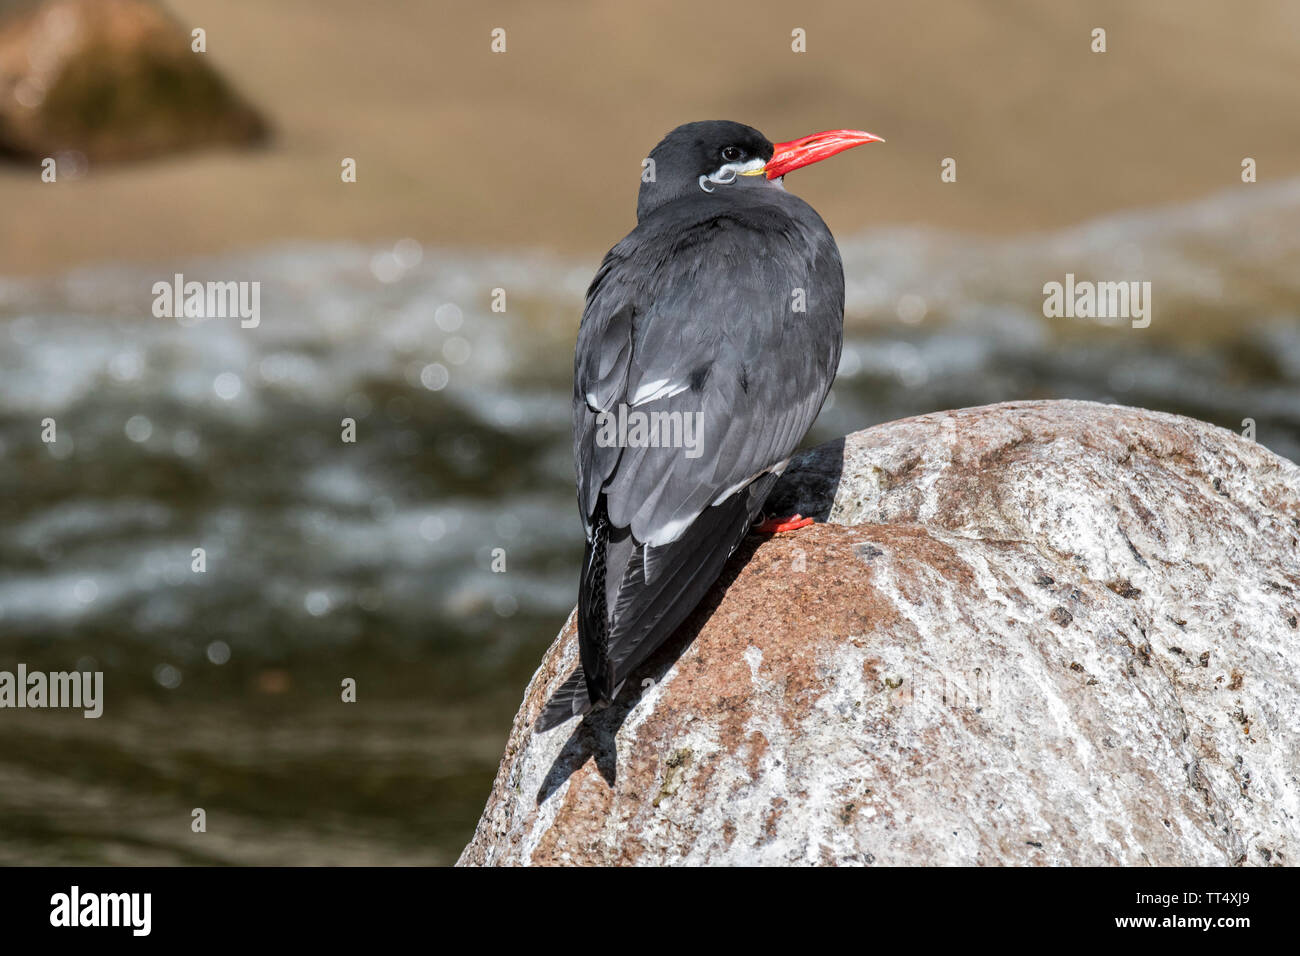 Inca tern (Larosterna inca) perched on rock on the beach, native to Chile, Colombia, Ecuador and Peru Stock Photo